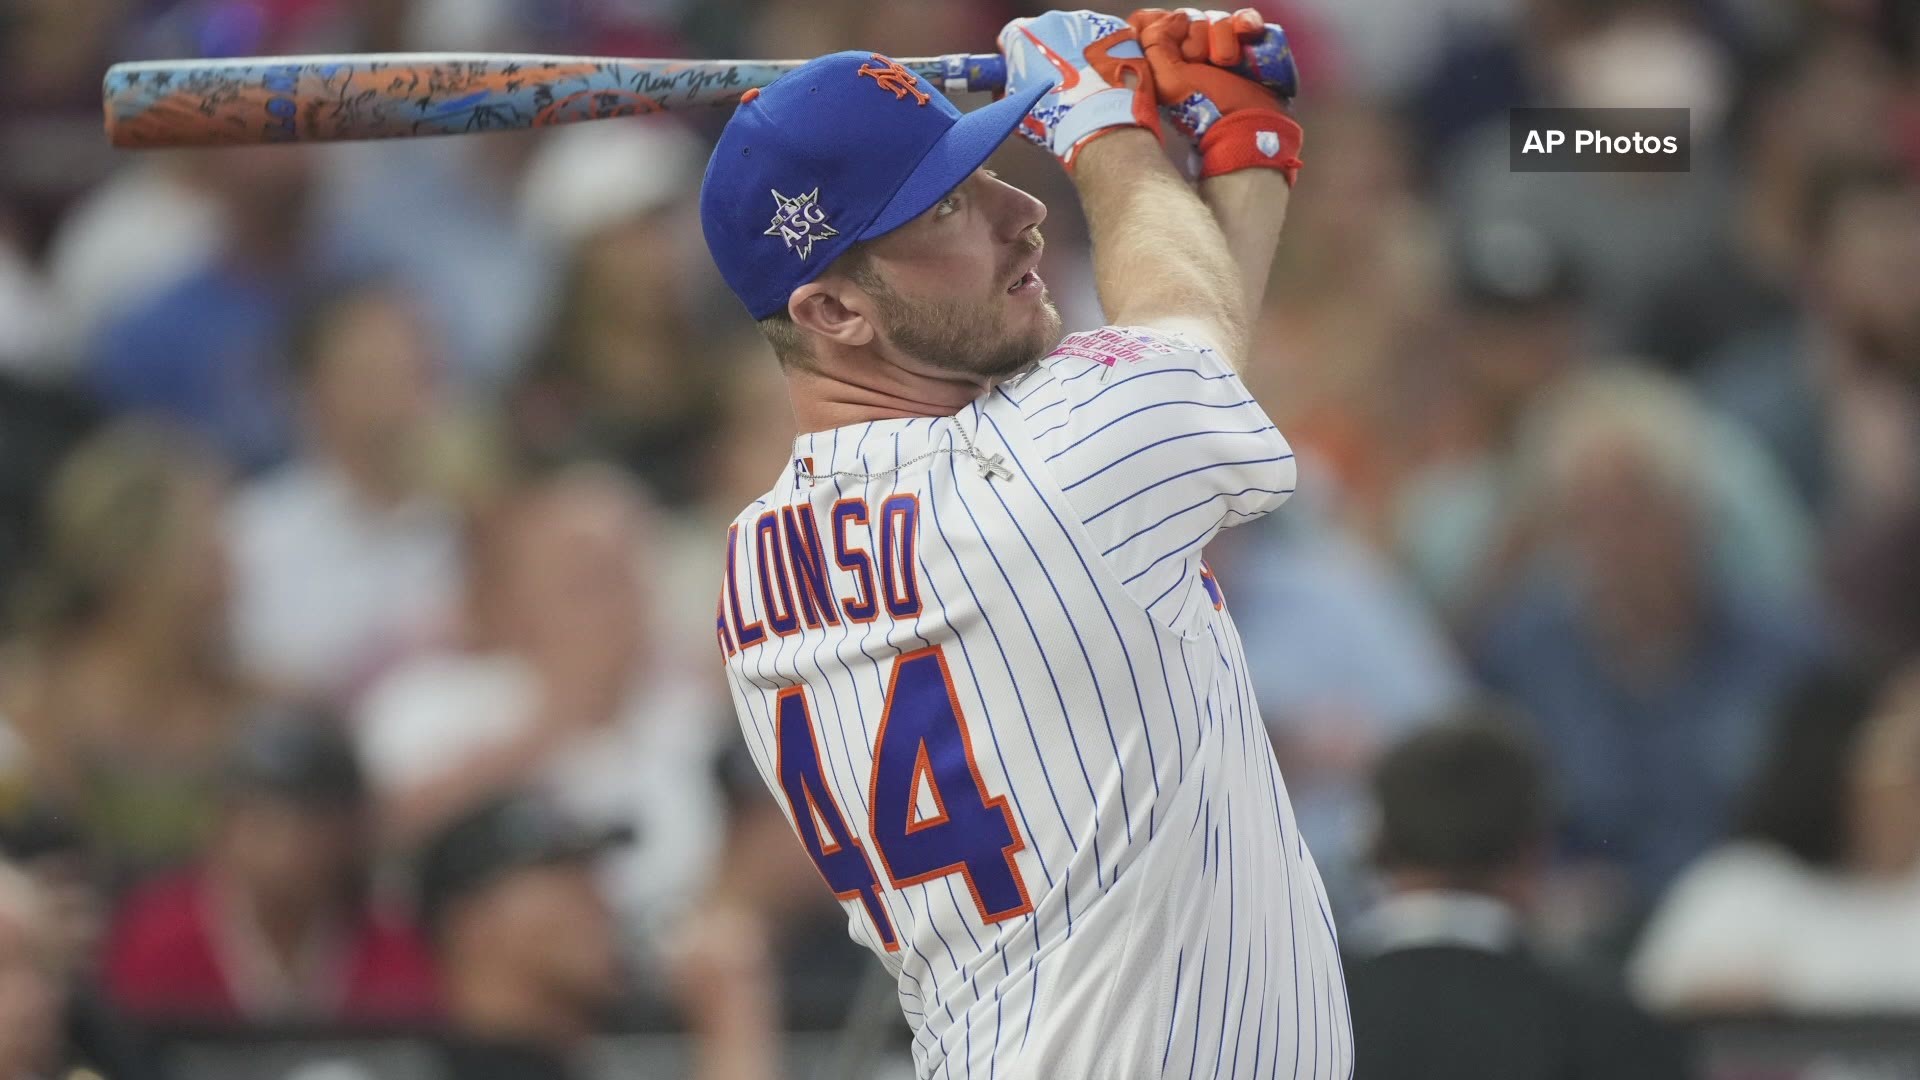 Pete Alonso of the New York Mets won the Major League Baseball Home Run Derby Monday night for the second time in a row.